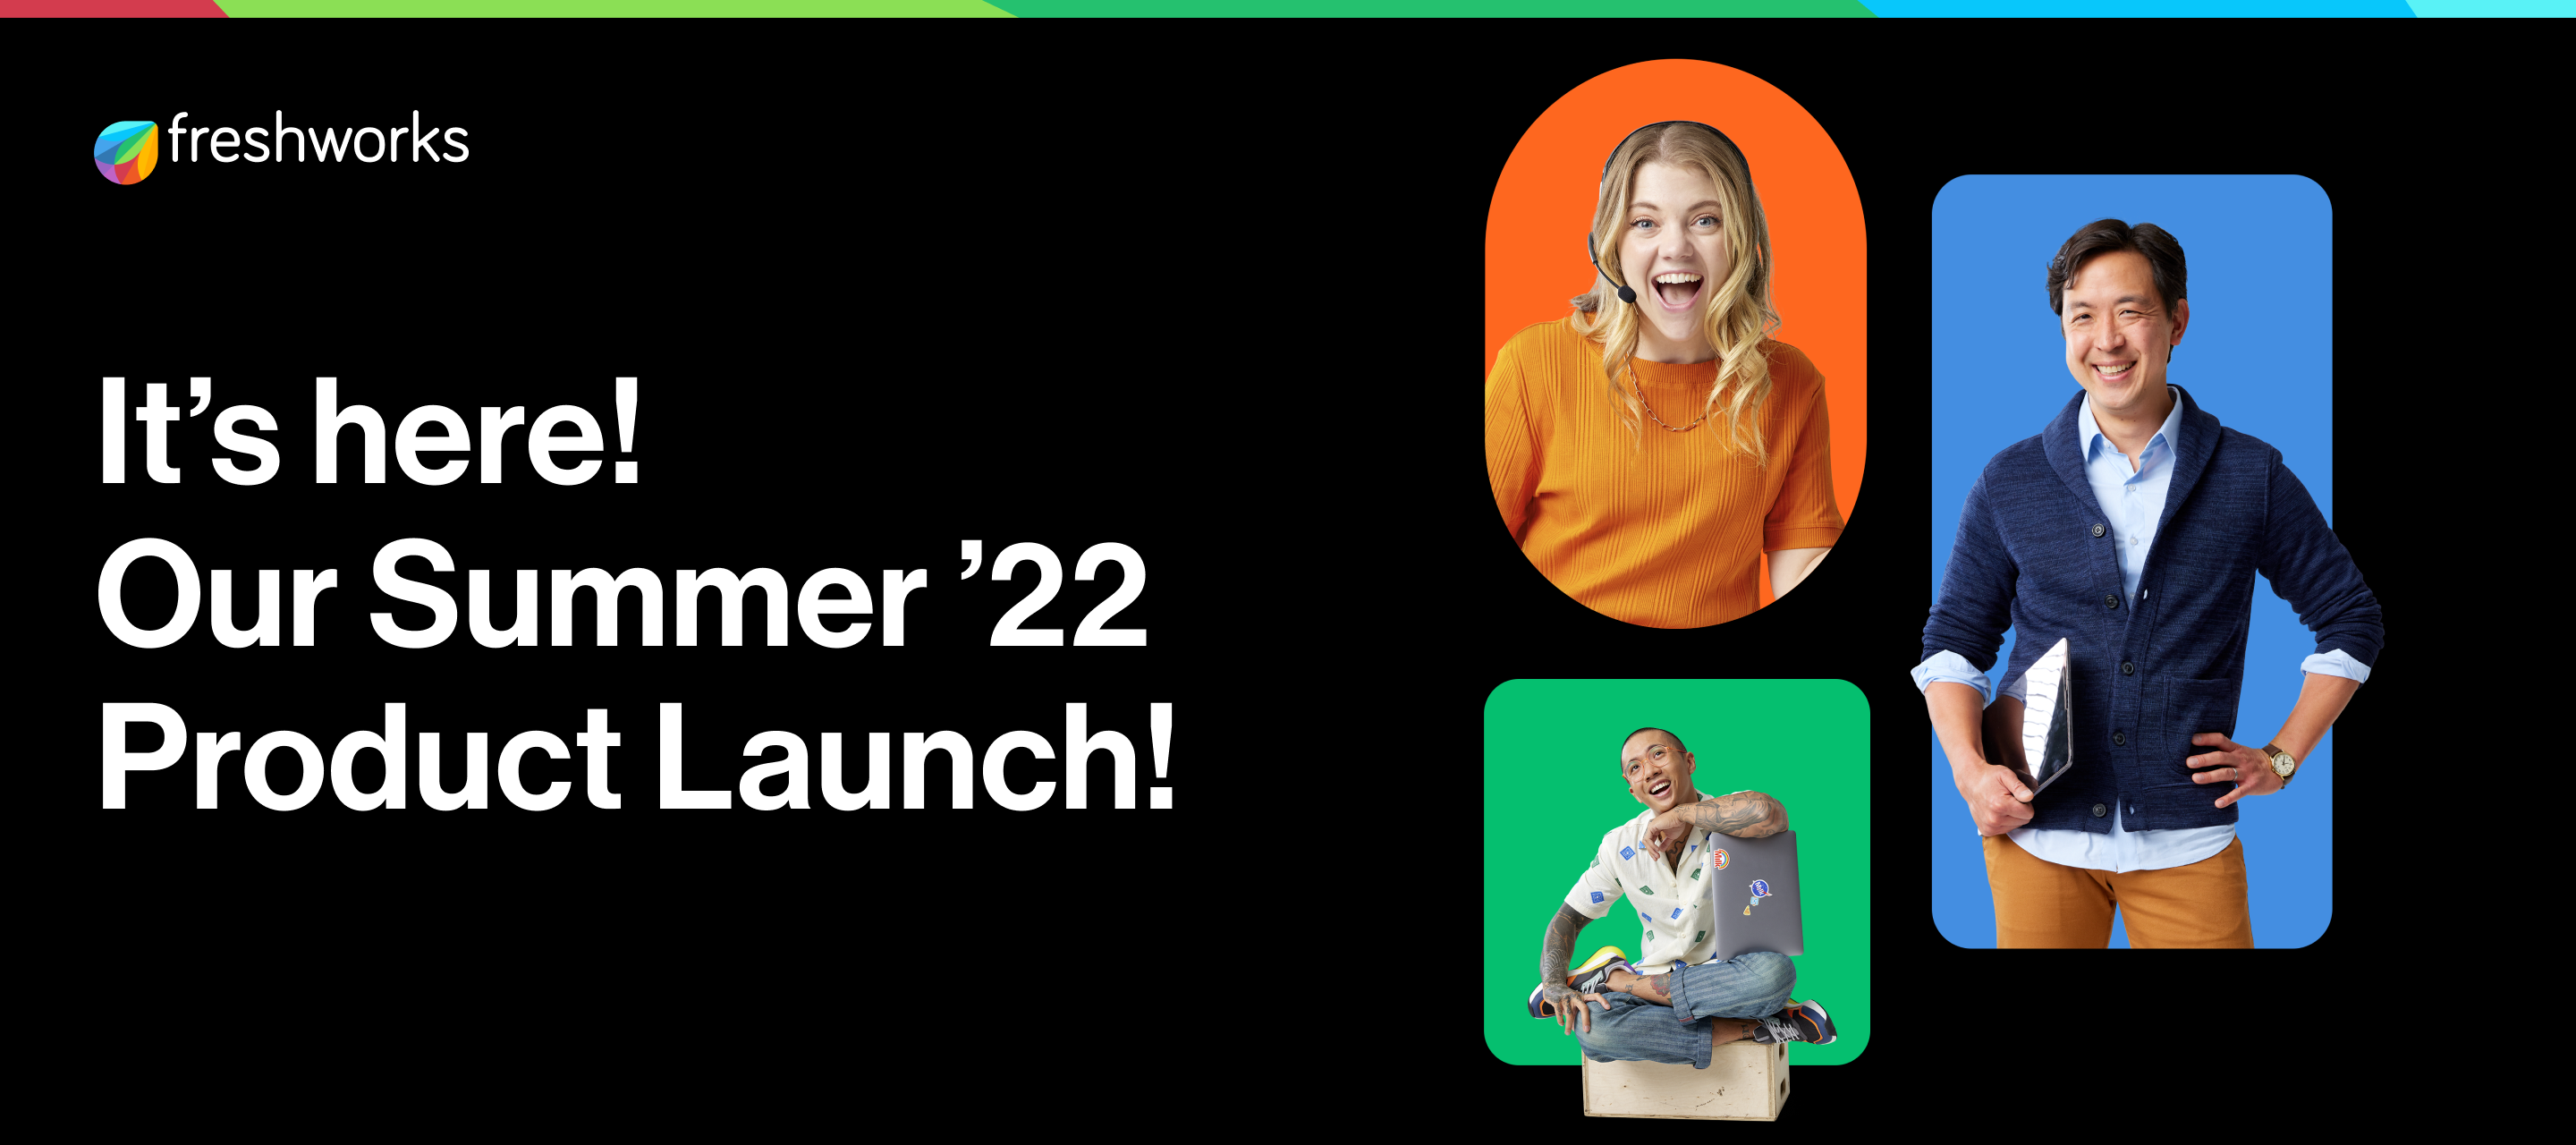 Share your thoughts: Summer '22 Product Launch